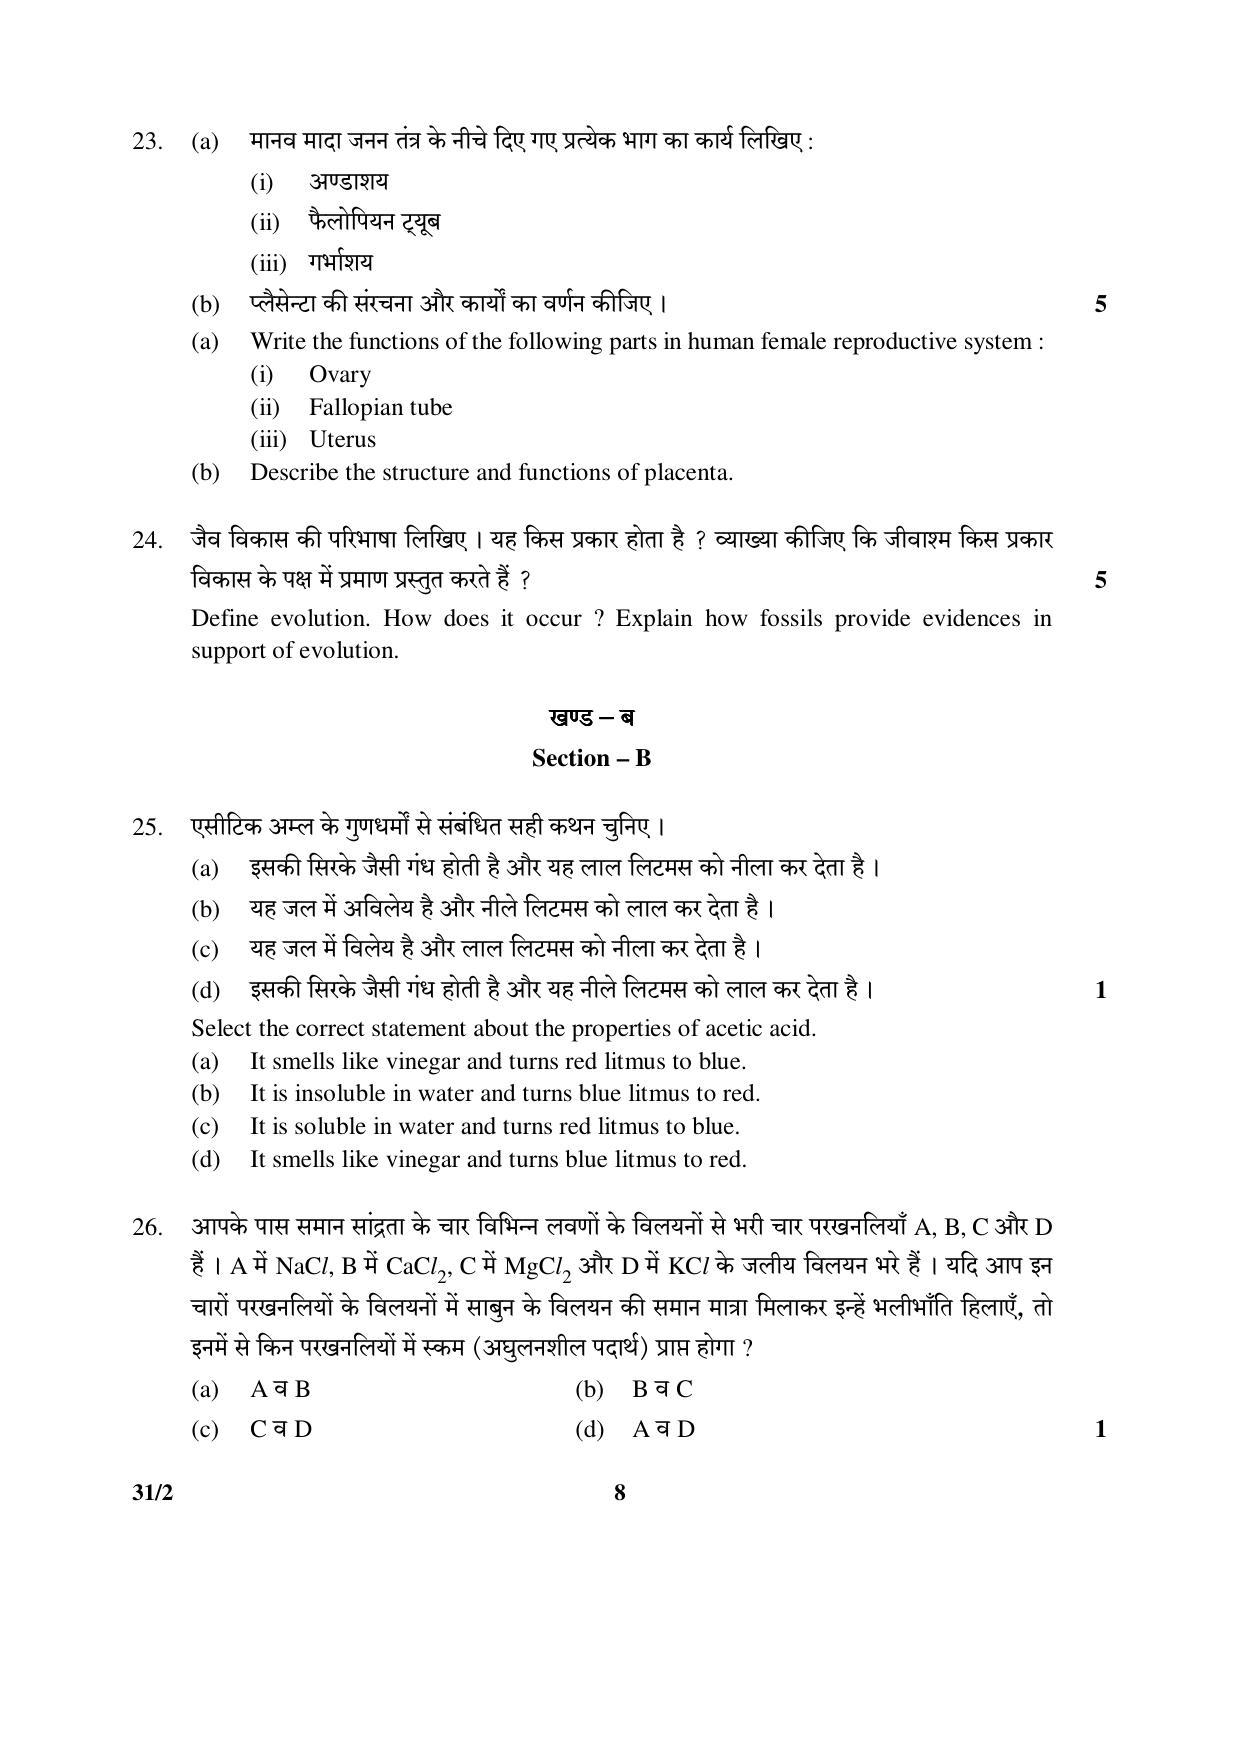 CBSE Class 10 31-2 (Science) 2017-comptt Question Paper - Page 8